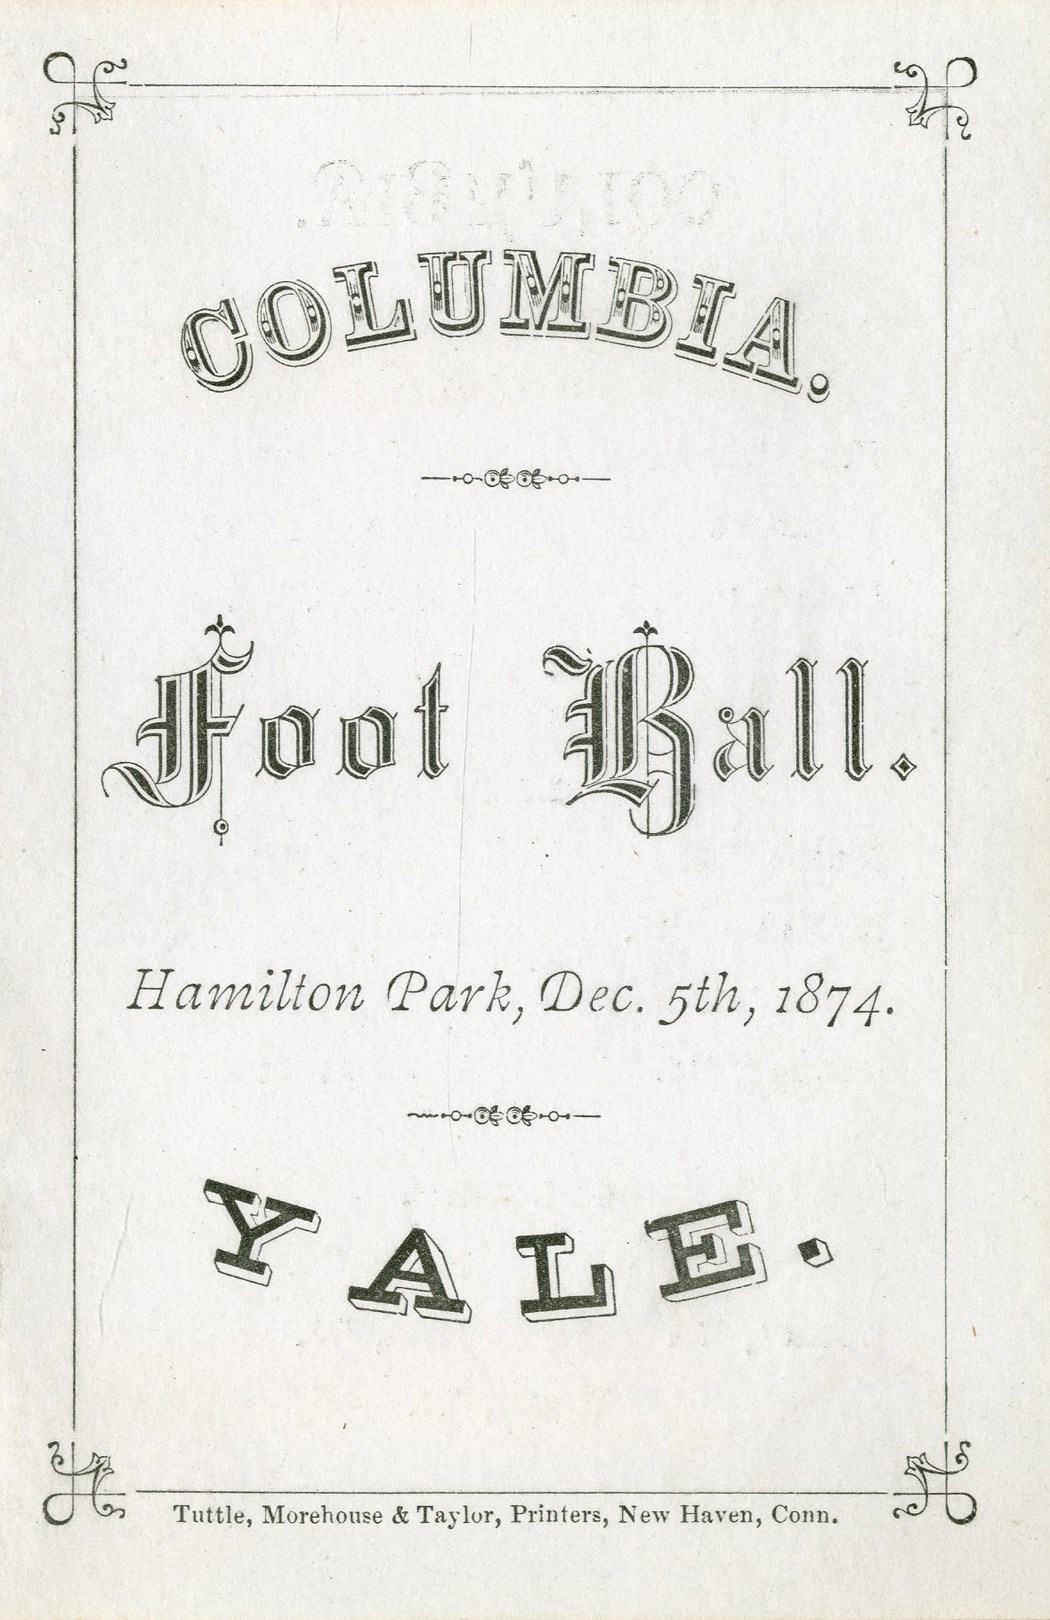 The Ivy League And Collegiate Program Archive - 1874 Yale vs. Columbia Football Program